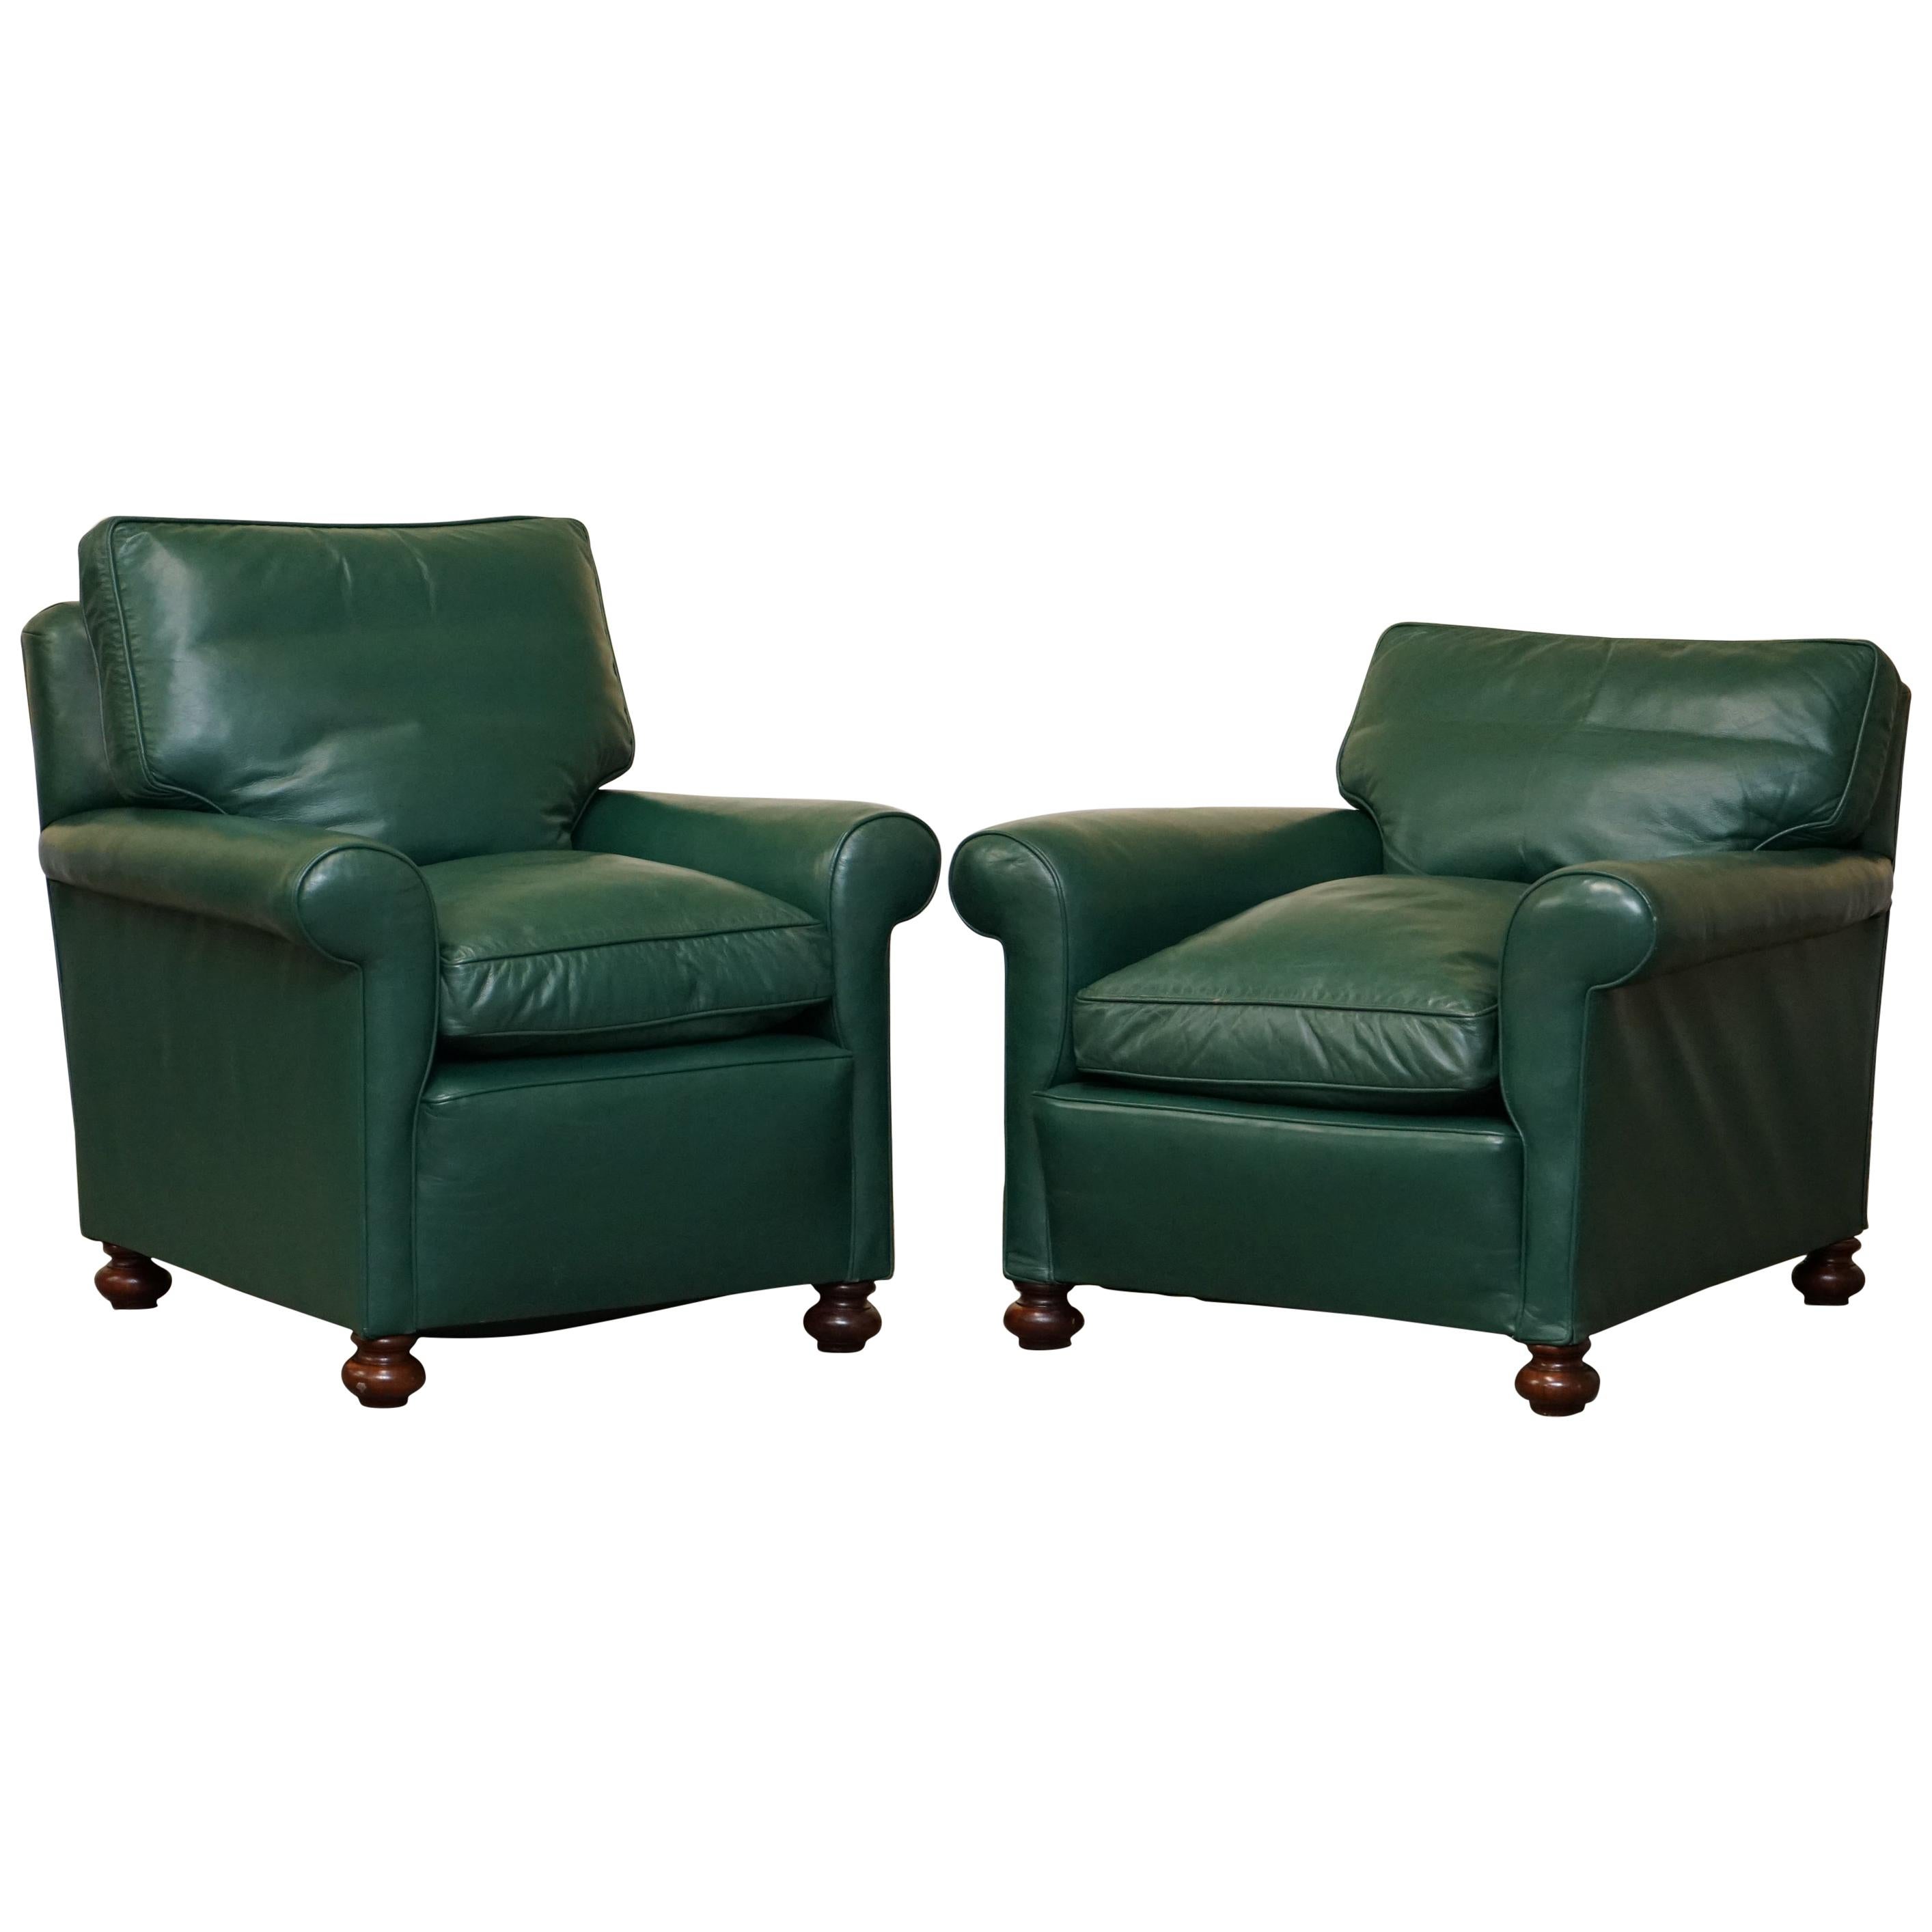 Pair of Edwardian circa 1910 Soft Green Leather Feather Filled Cushion Armchairs